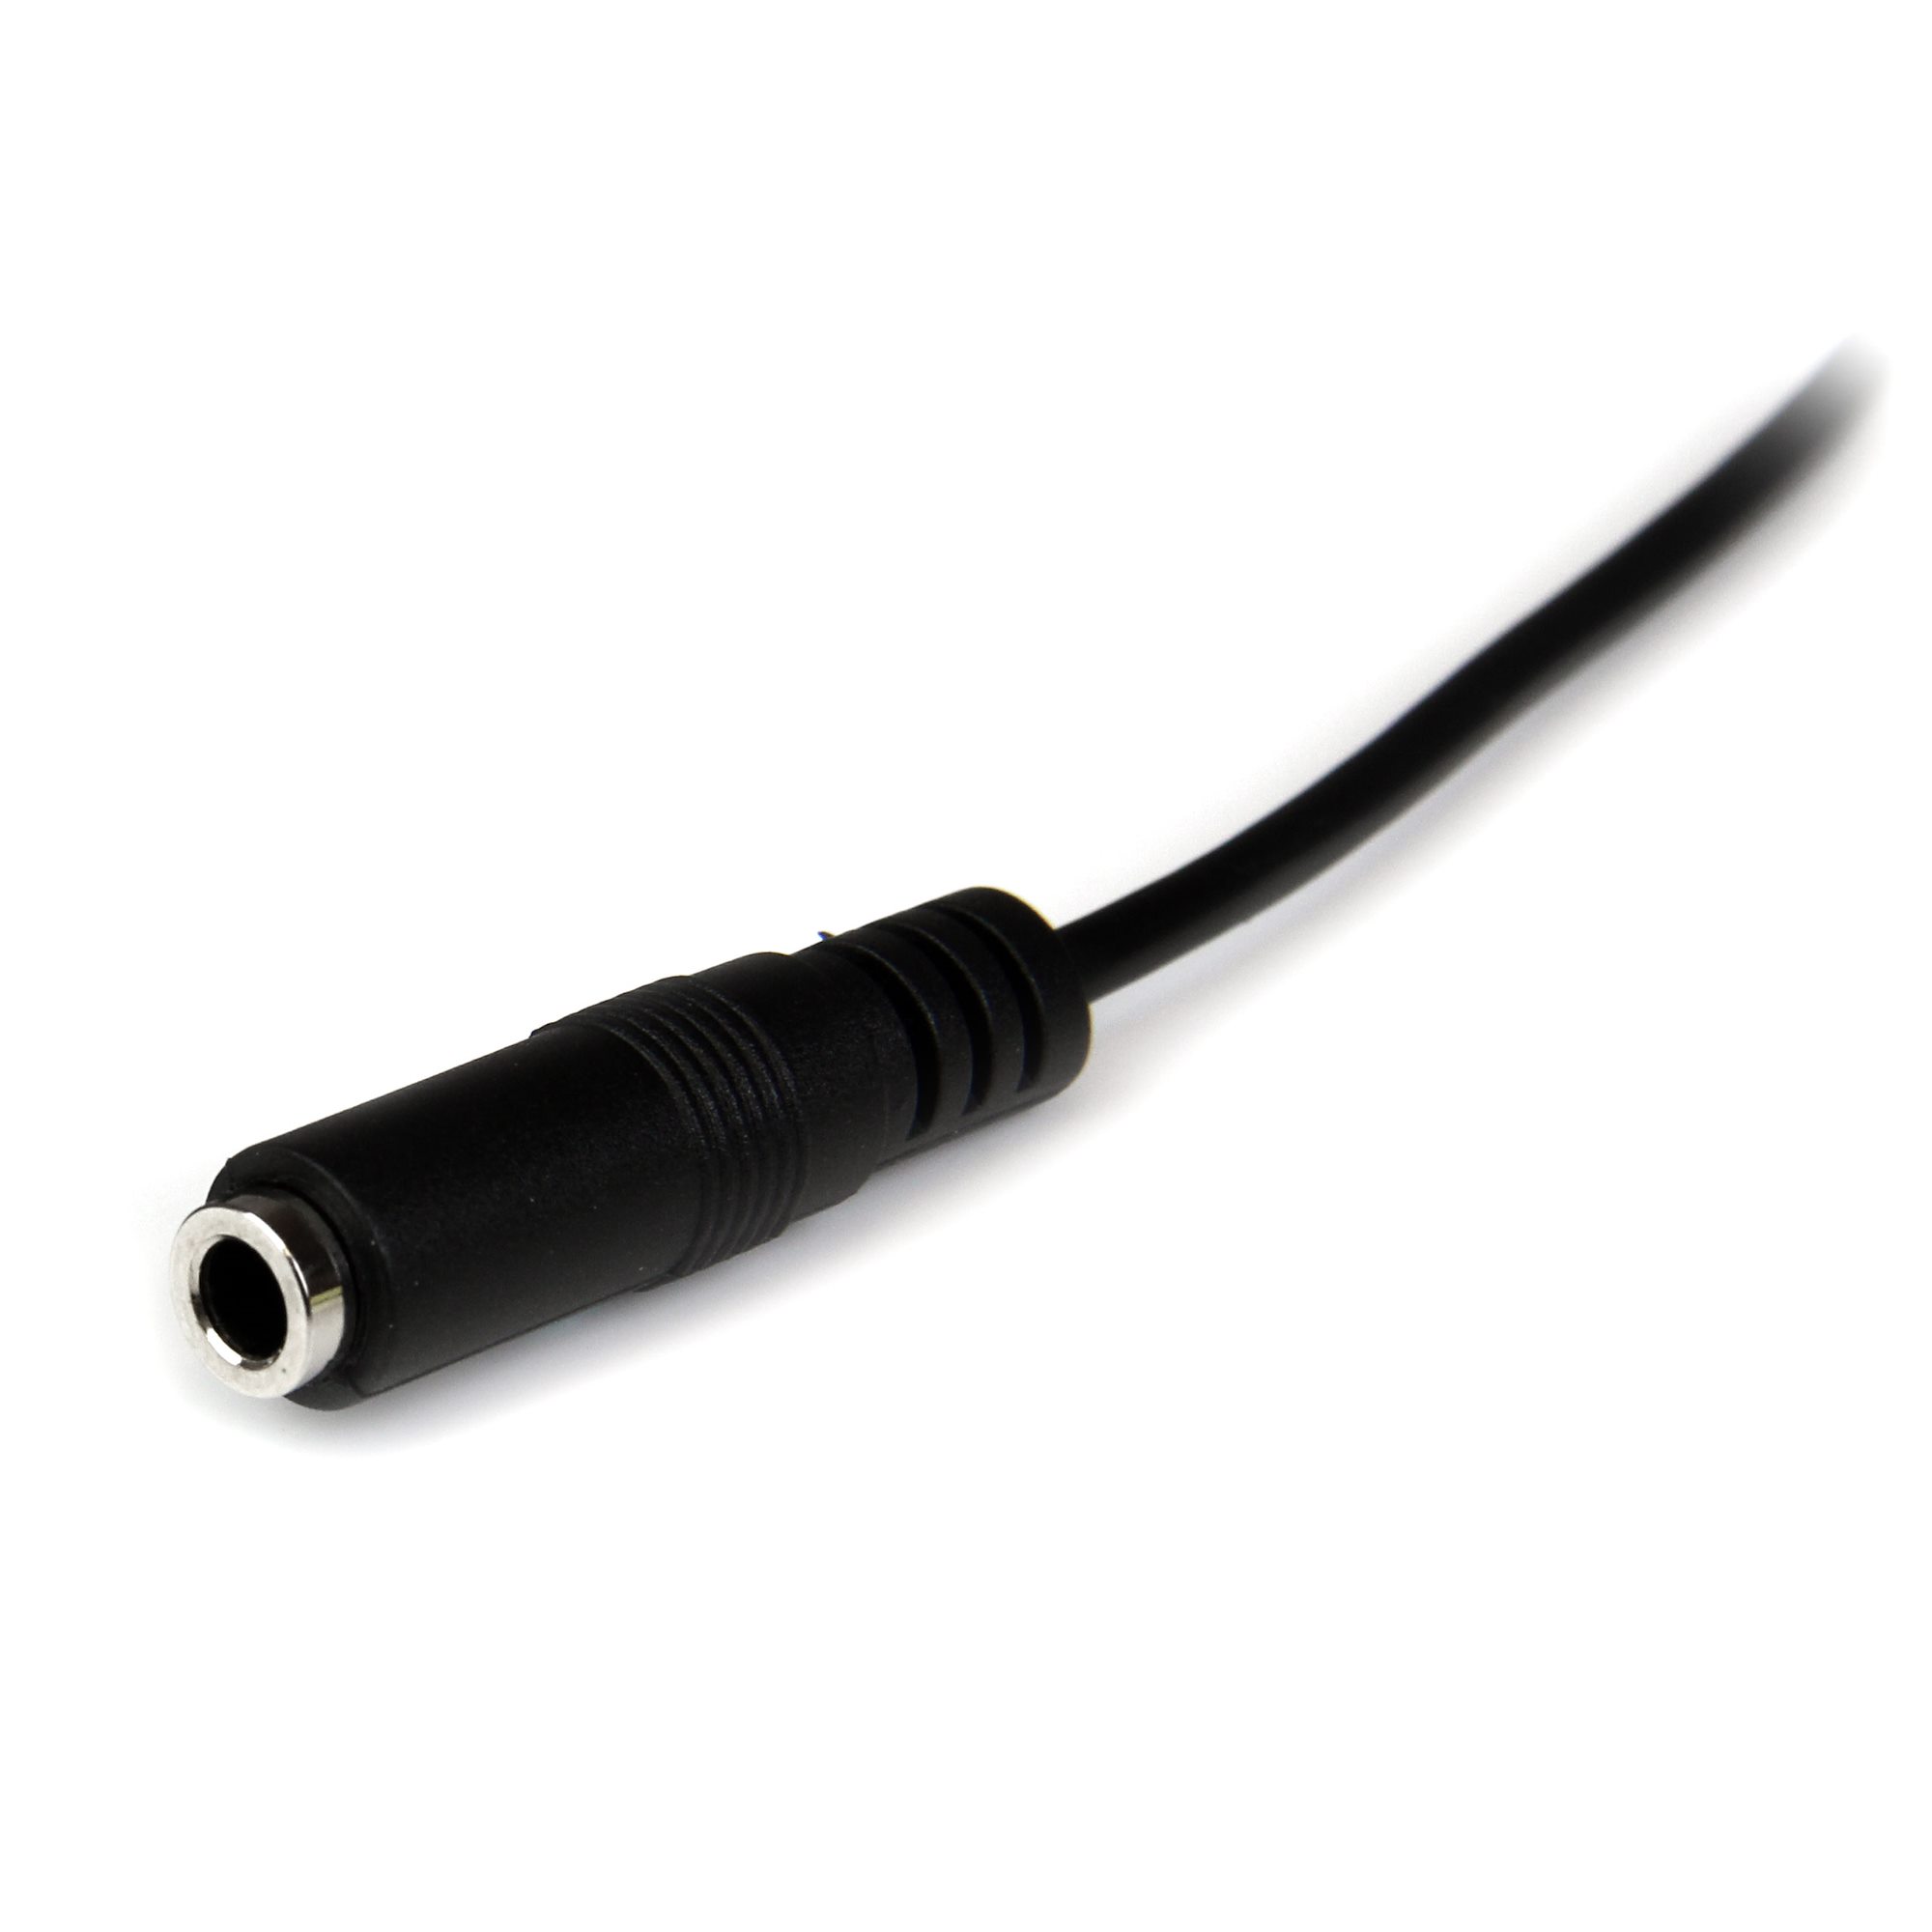 Audio Jack (Male to Male) Cable 2M - Ireland